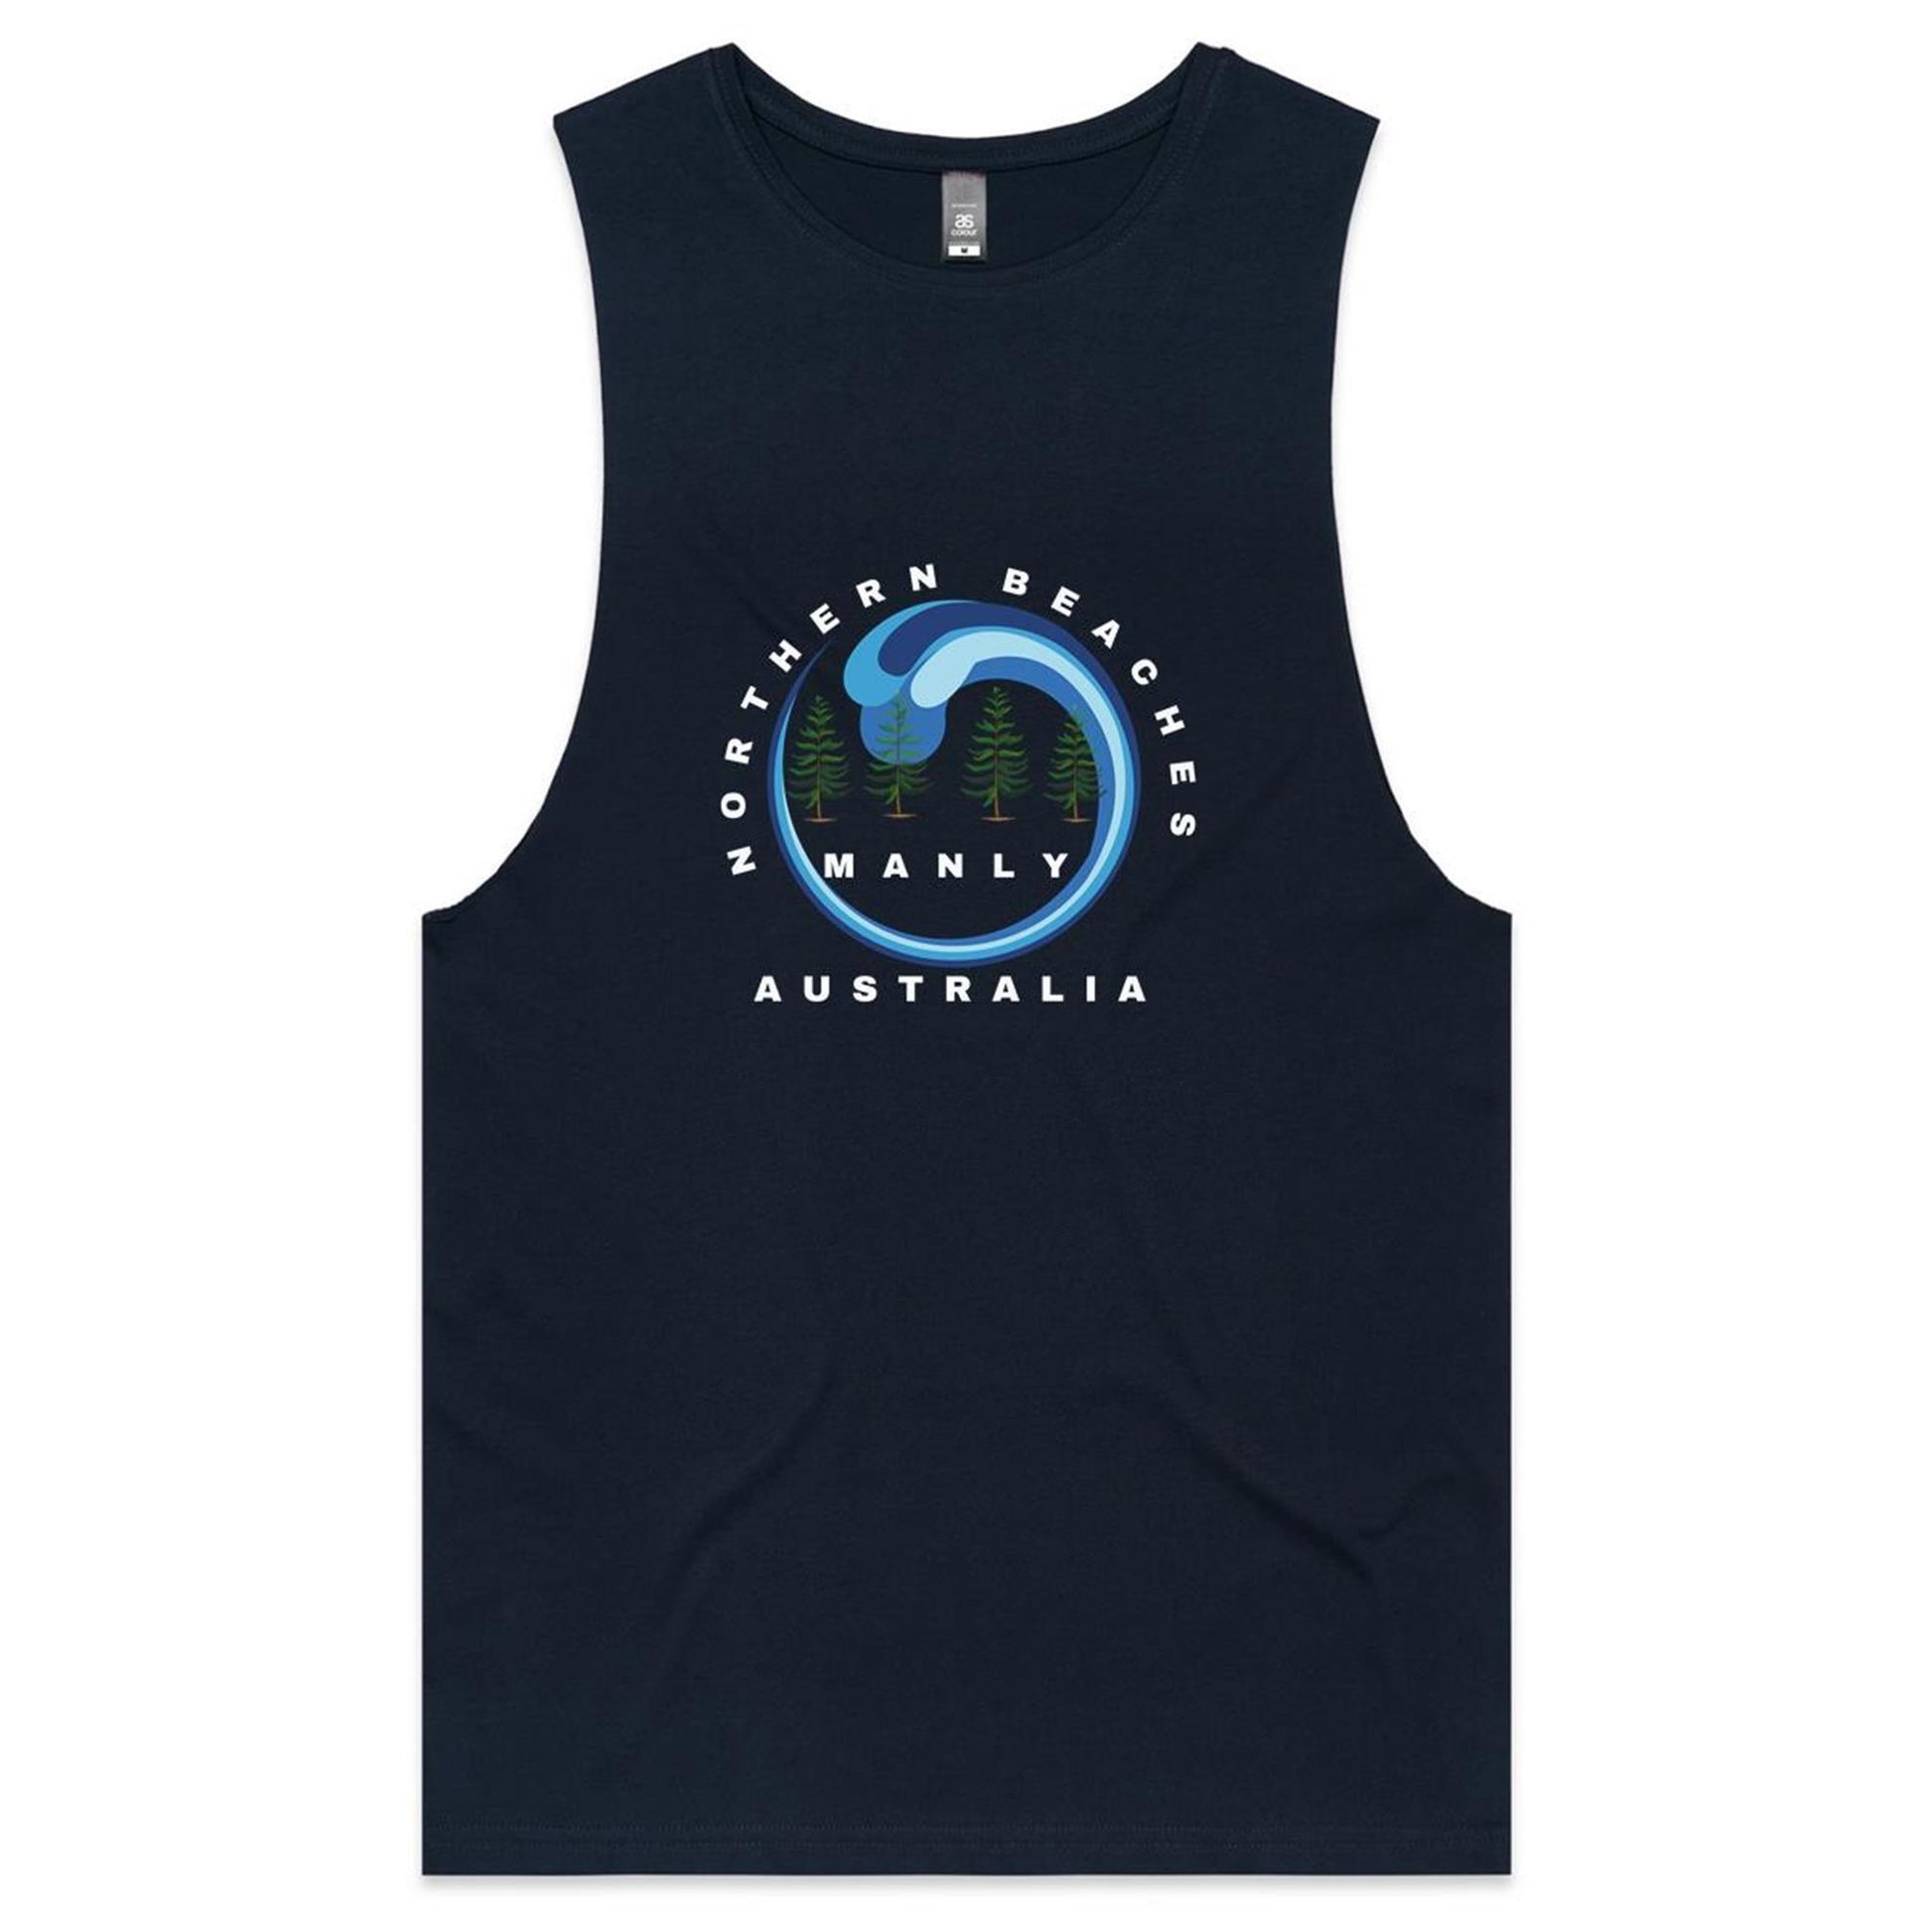 Classic Cotton Tank Northern Beaches logo design - Lost Manly Shop